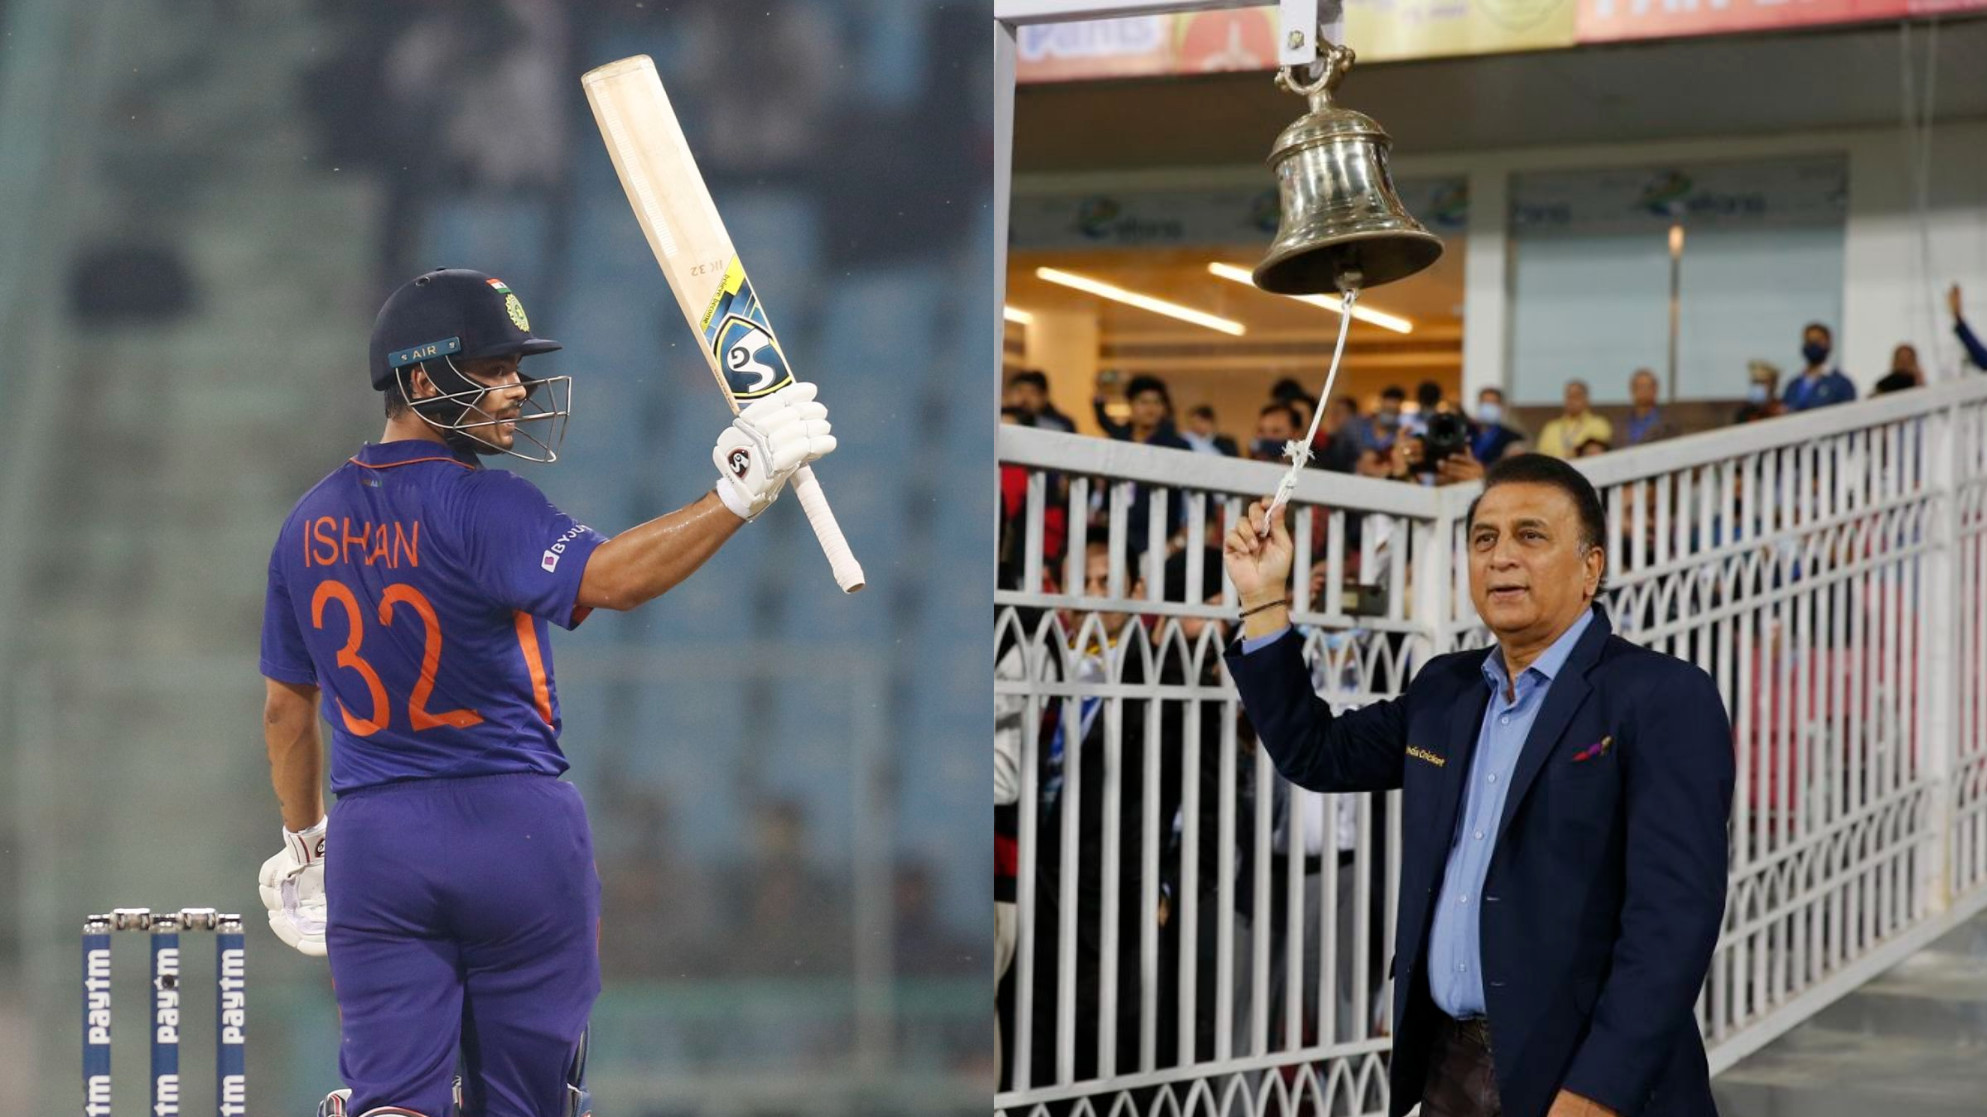 IND v SL 2022: “The pull shots were terrific, but it was one innings”: Gavaskar wants consistency from Kishan after 89-run knock